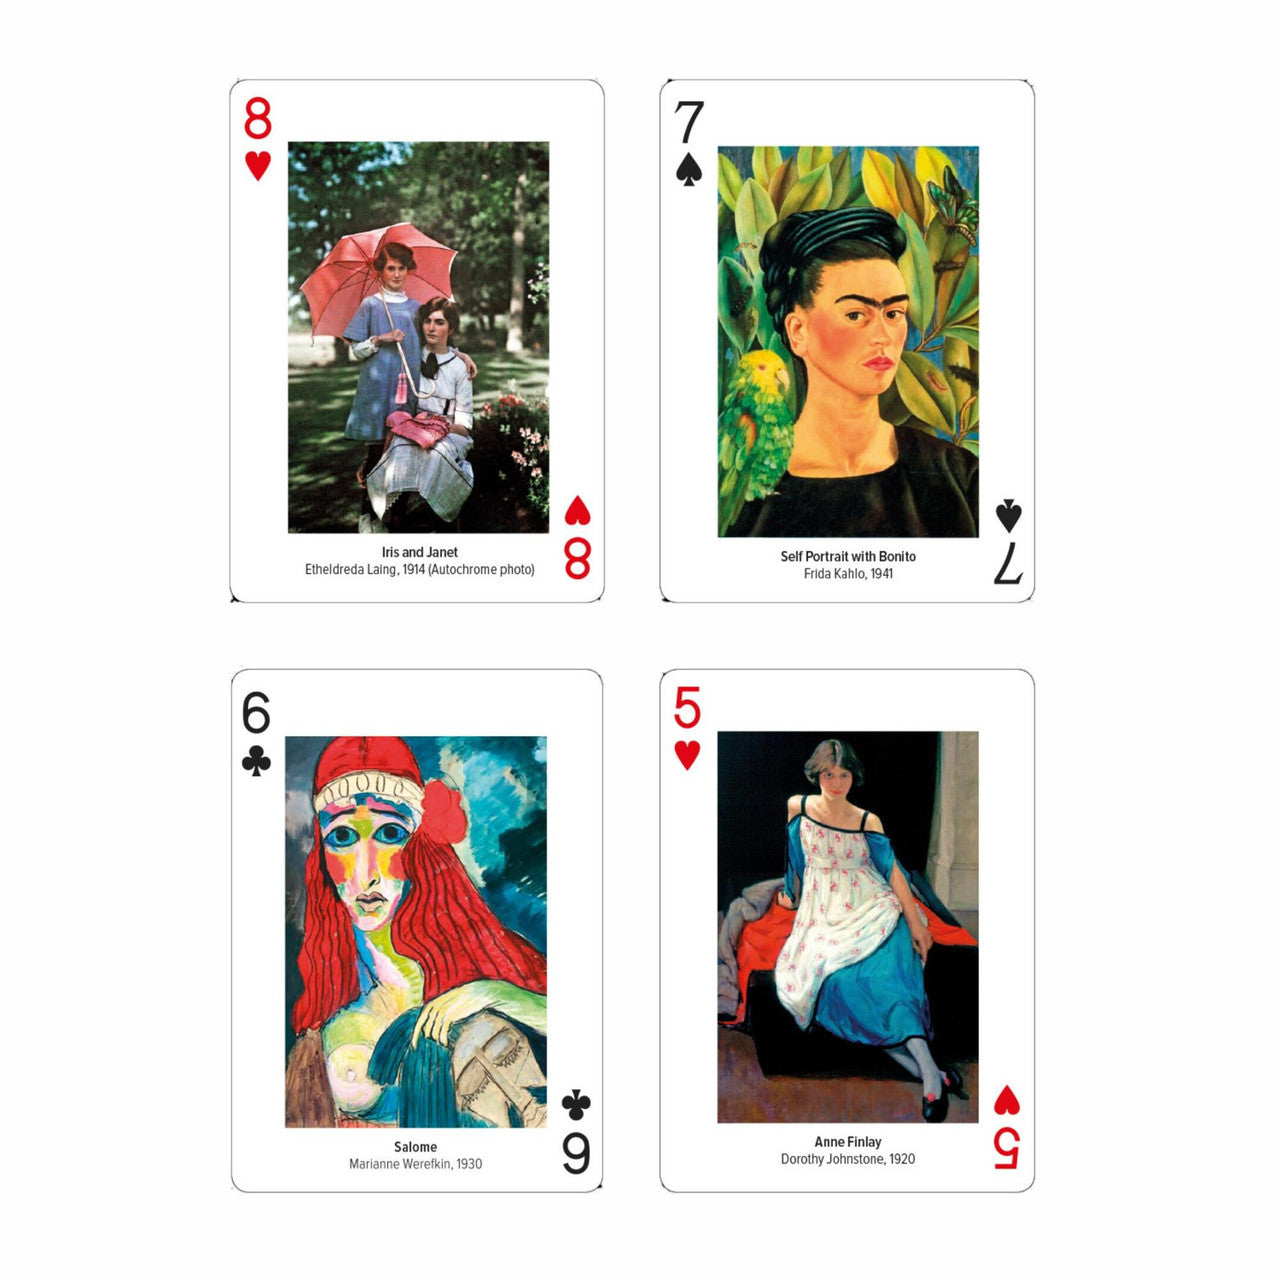 Women artists playing cards